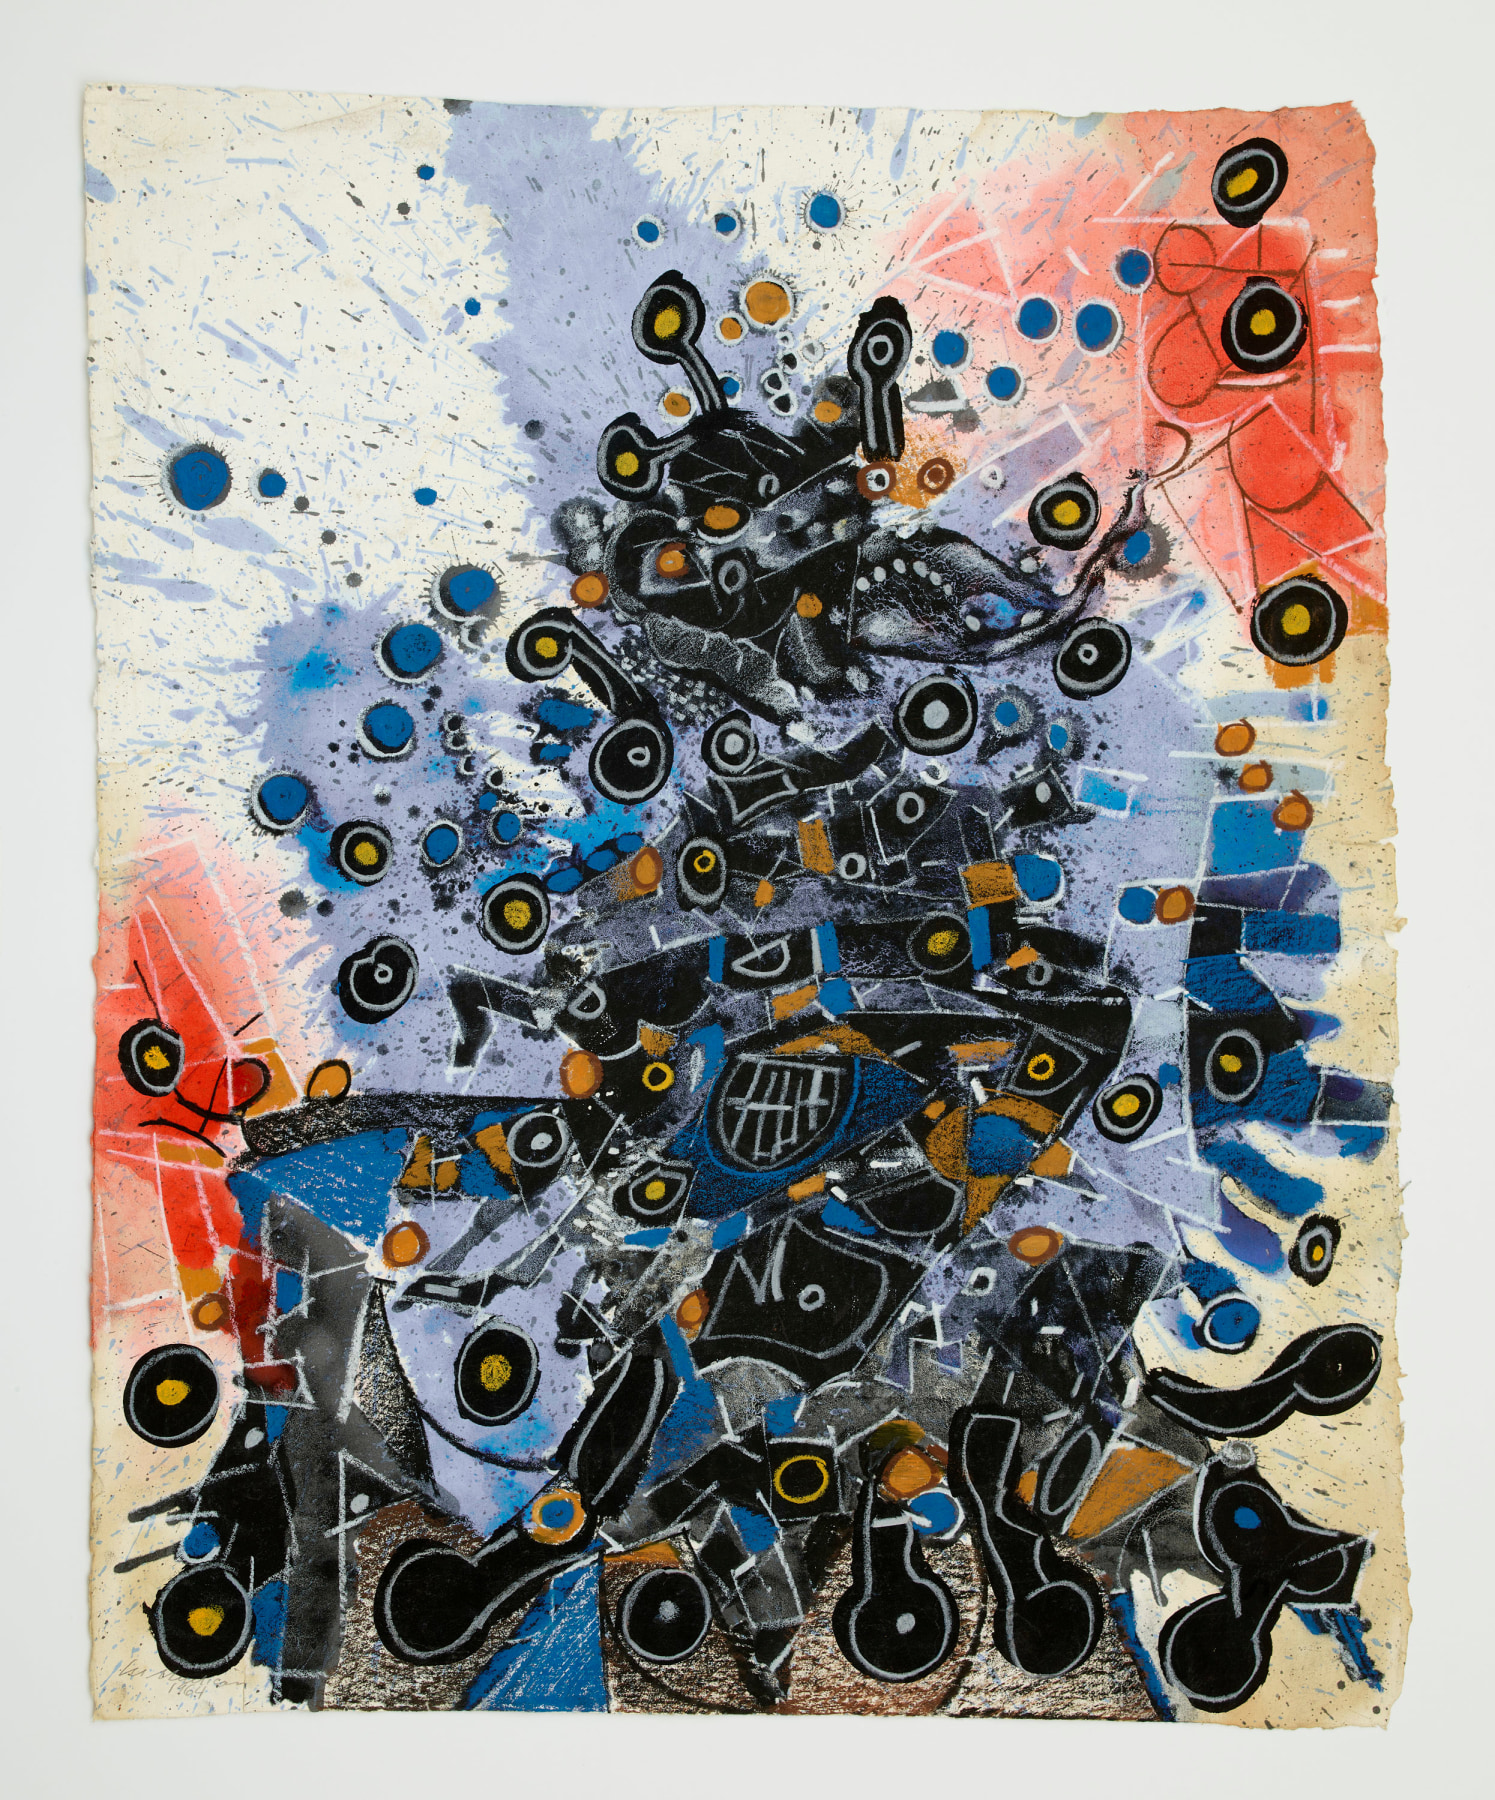 Image of LEE MULLICAN's Untitled, 1966